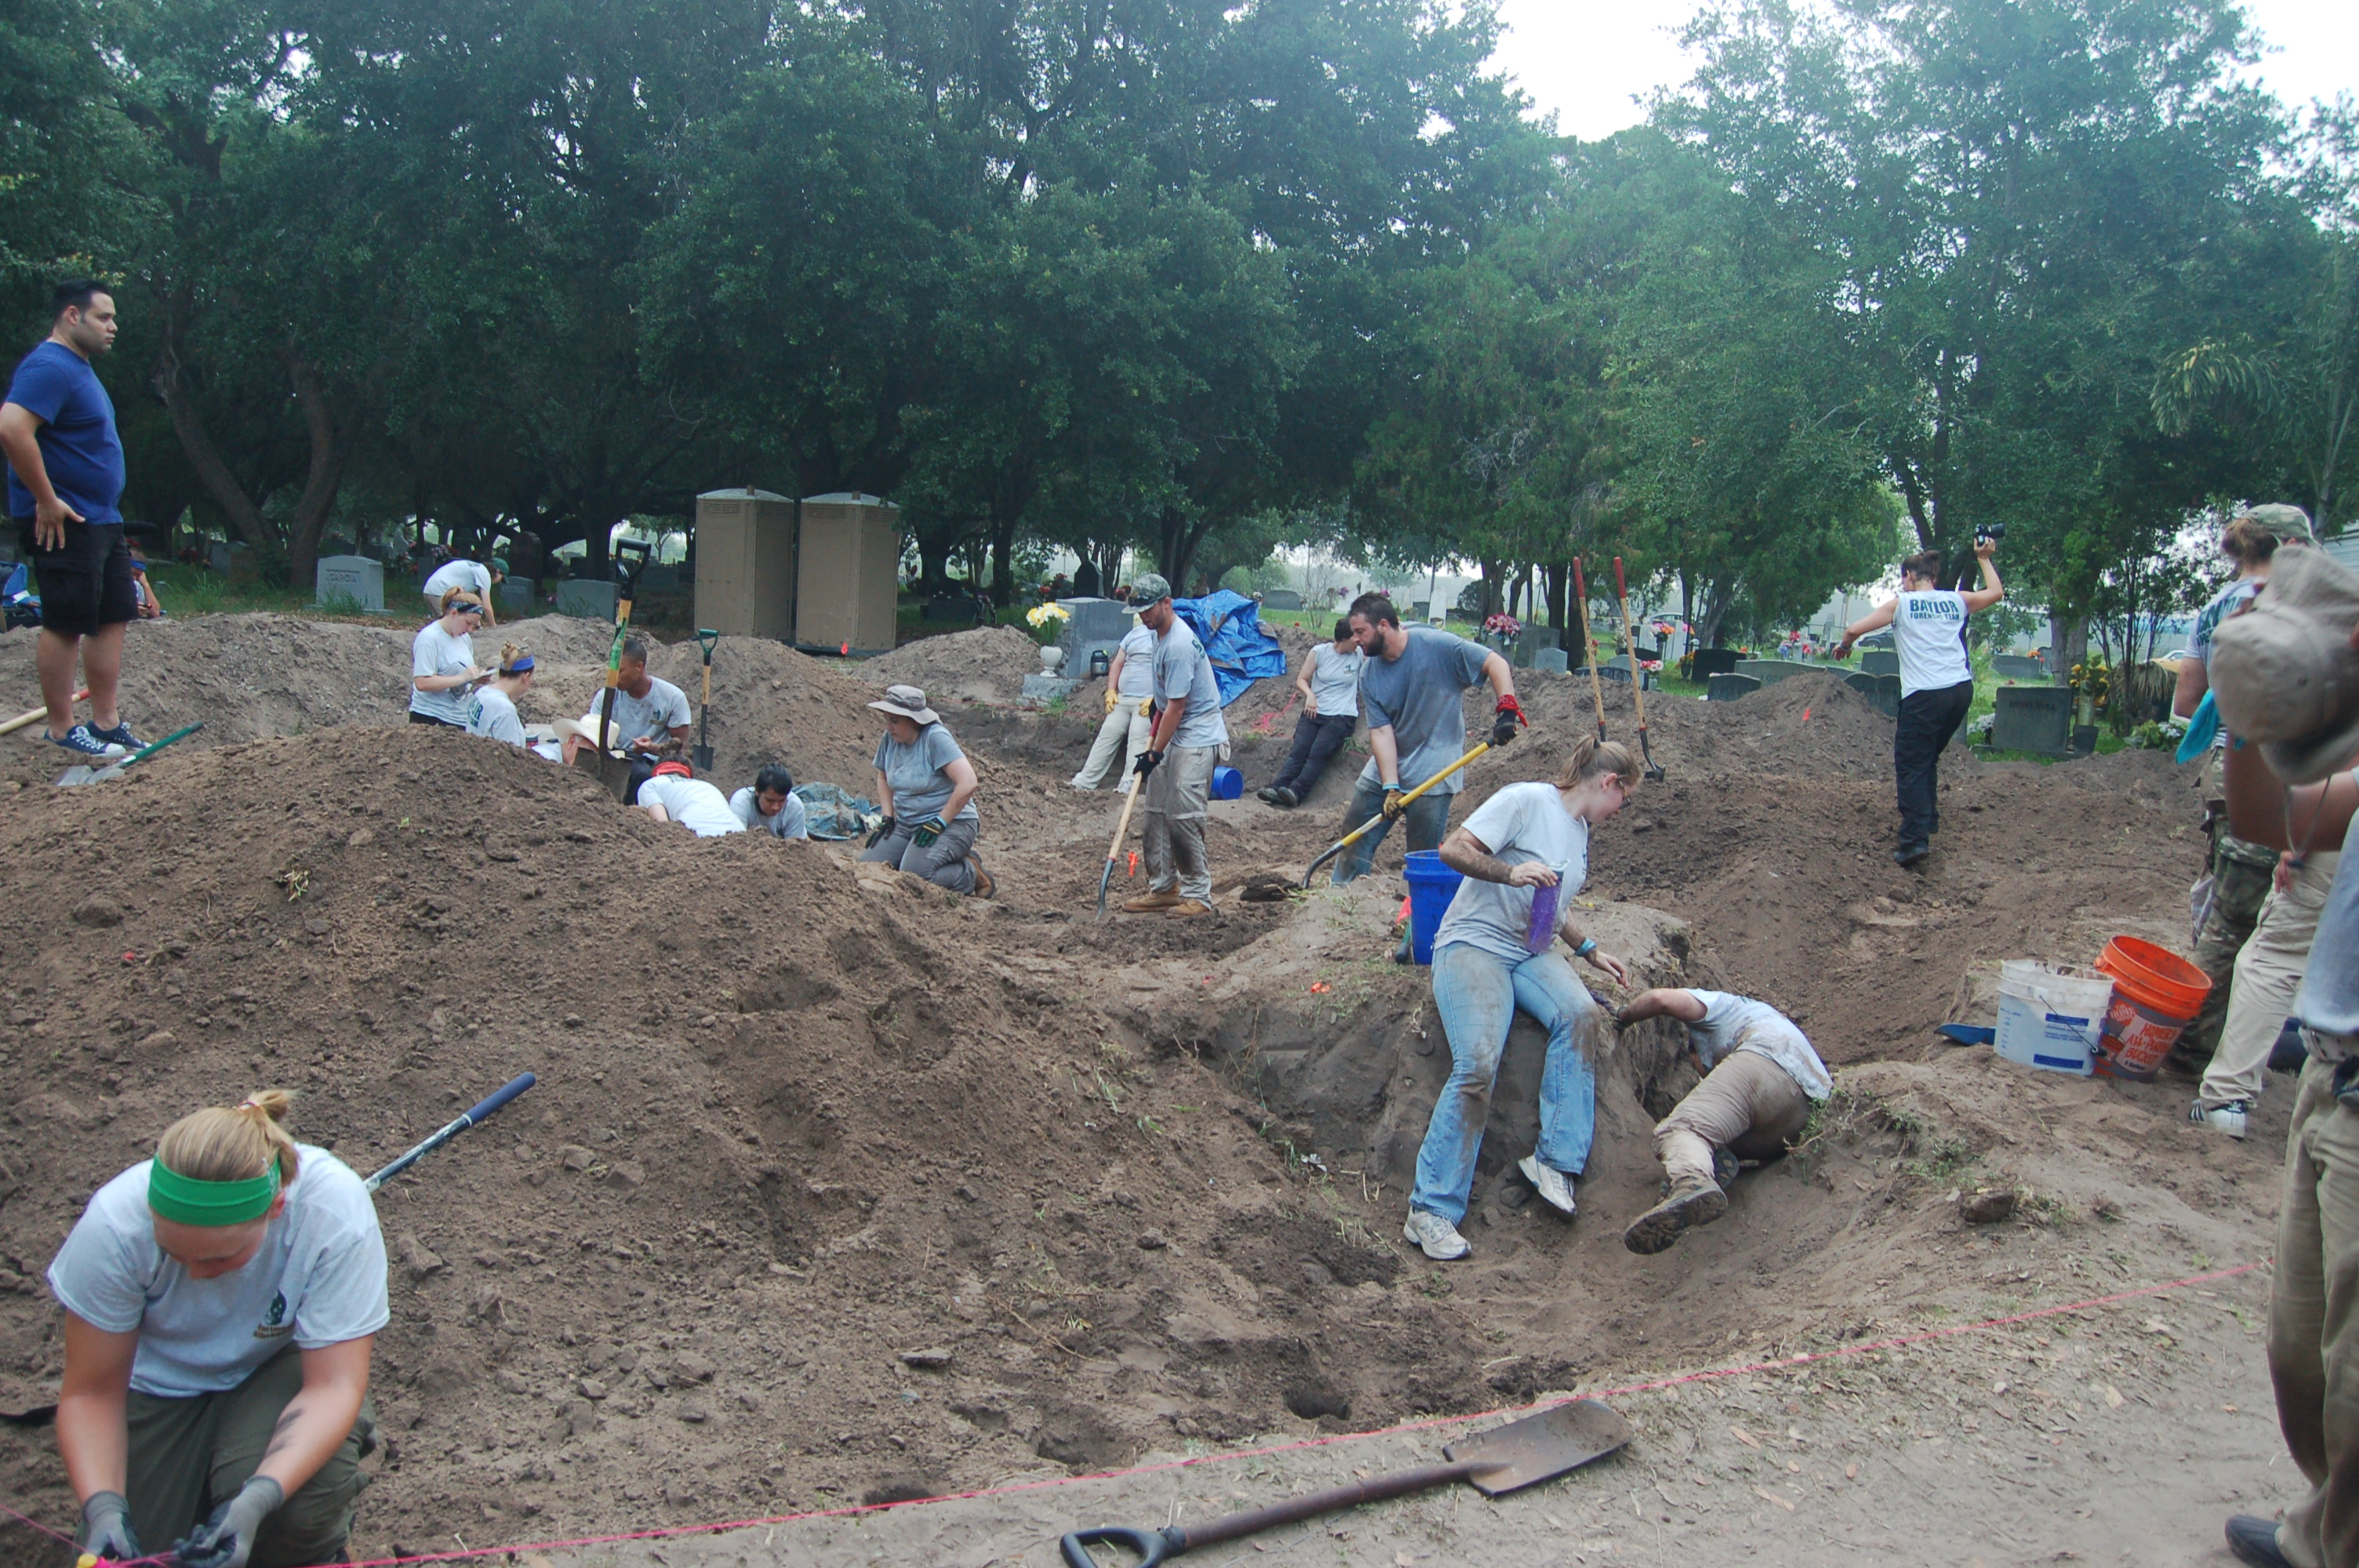 Overview pictures of multiple burials being worked on by many individuals with mounds of dirt surrounding